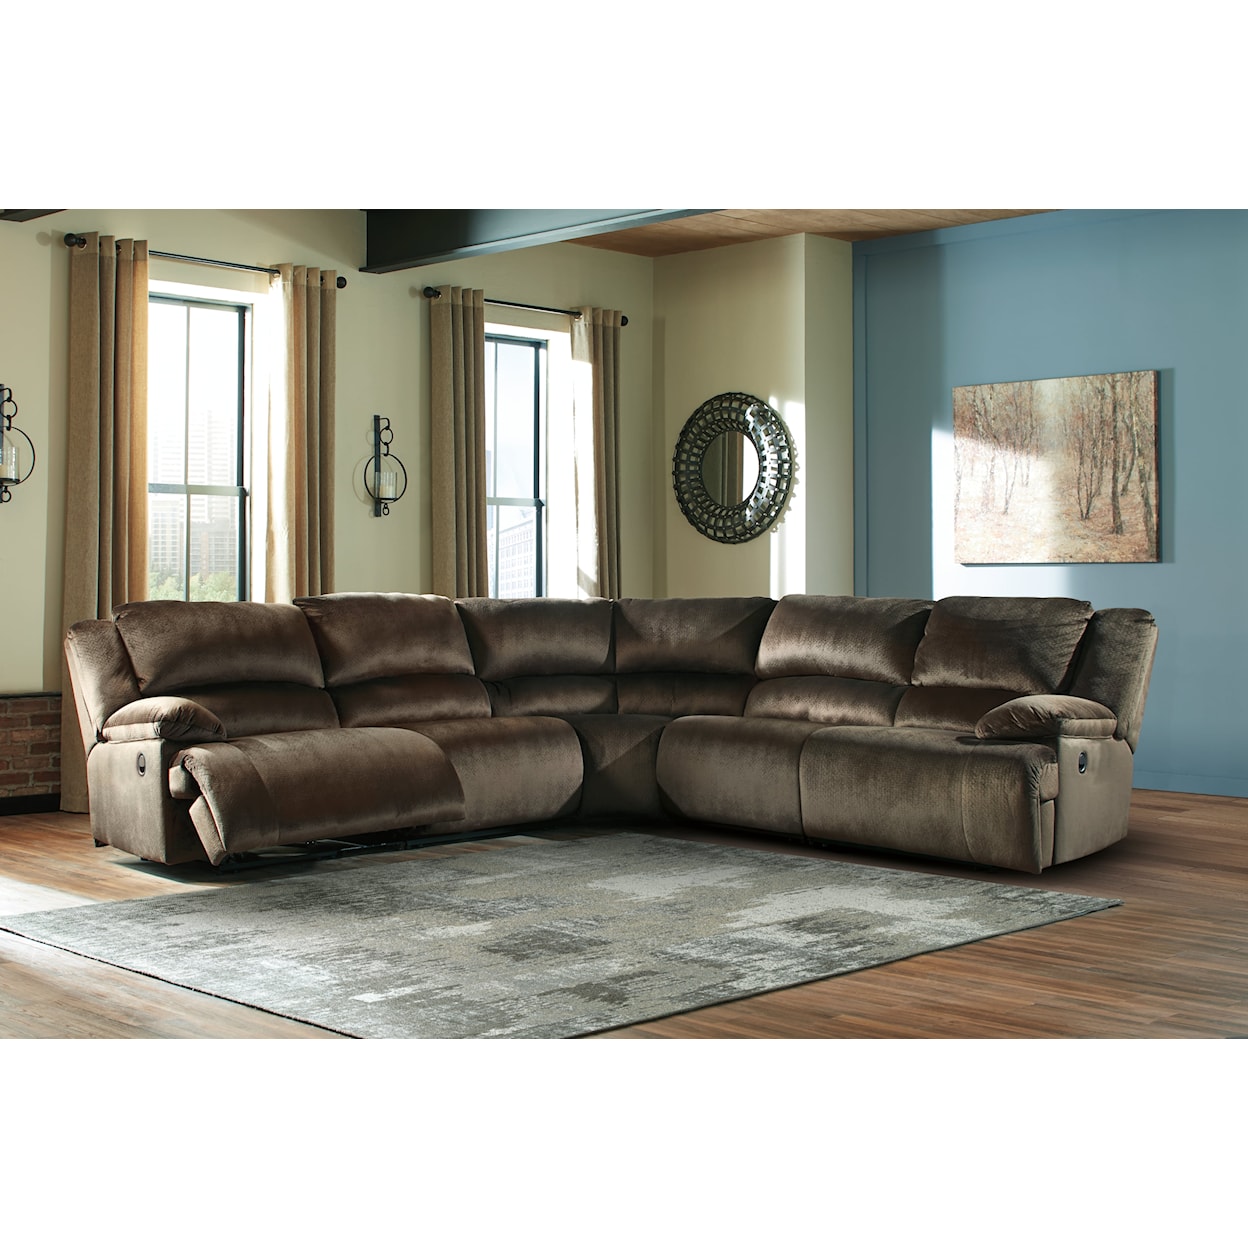 Signature Design by Ashley Furniture Clonmel 5-Piece Reclining Sectional